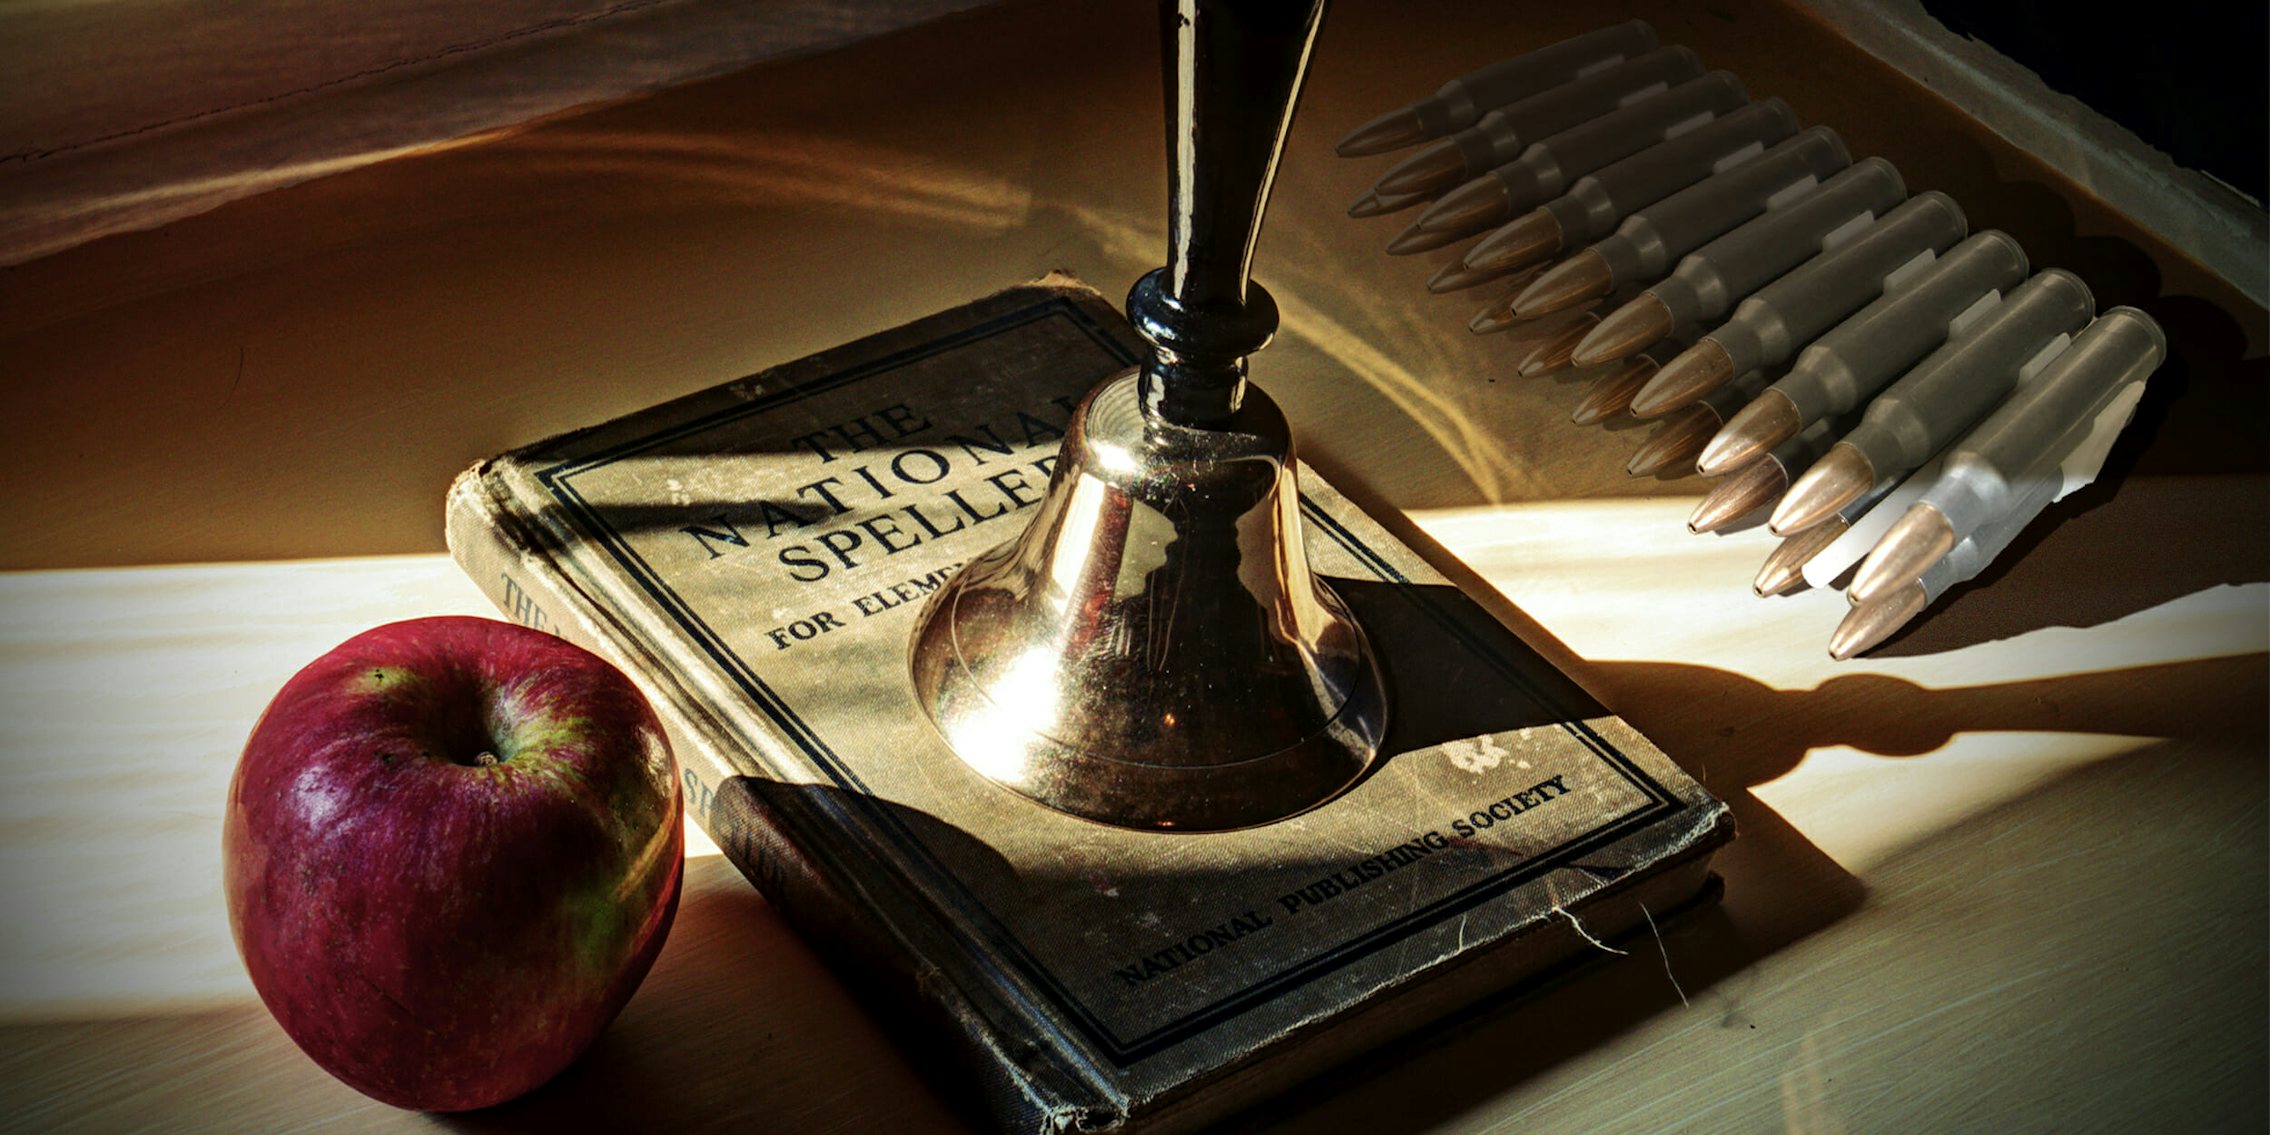 Teacher's desk with apple, spelling book, bell, and bullets